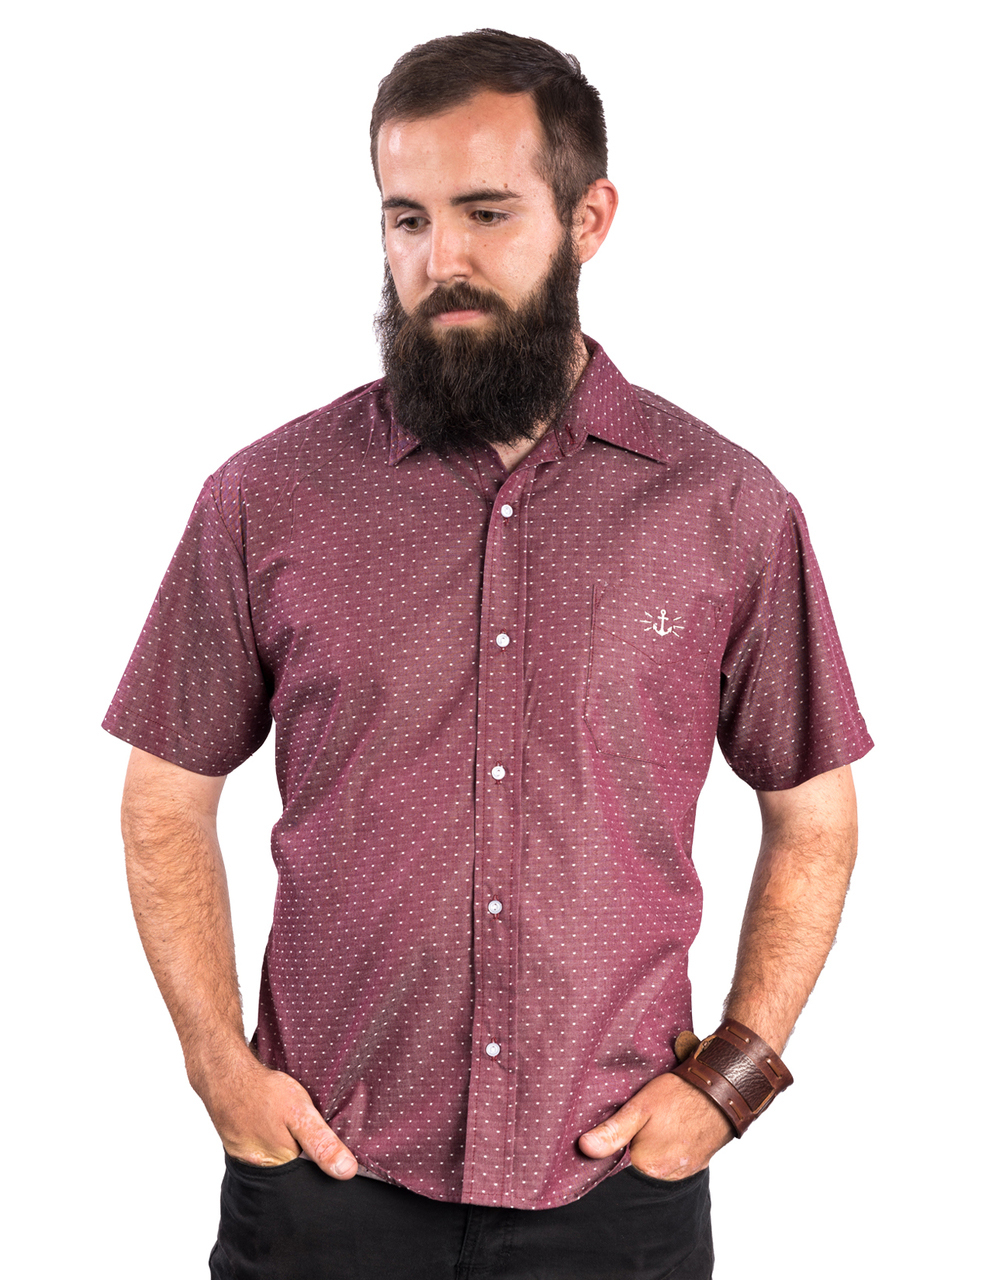 Half Seas Button Up Western Shirt by Steady - in Burgundy - SALE 2X only